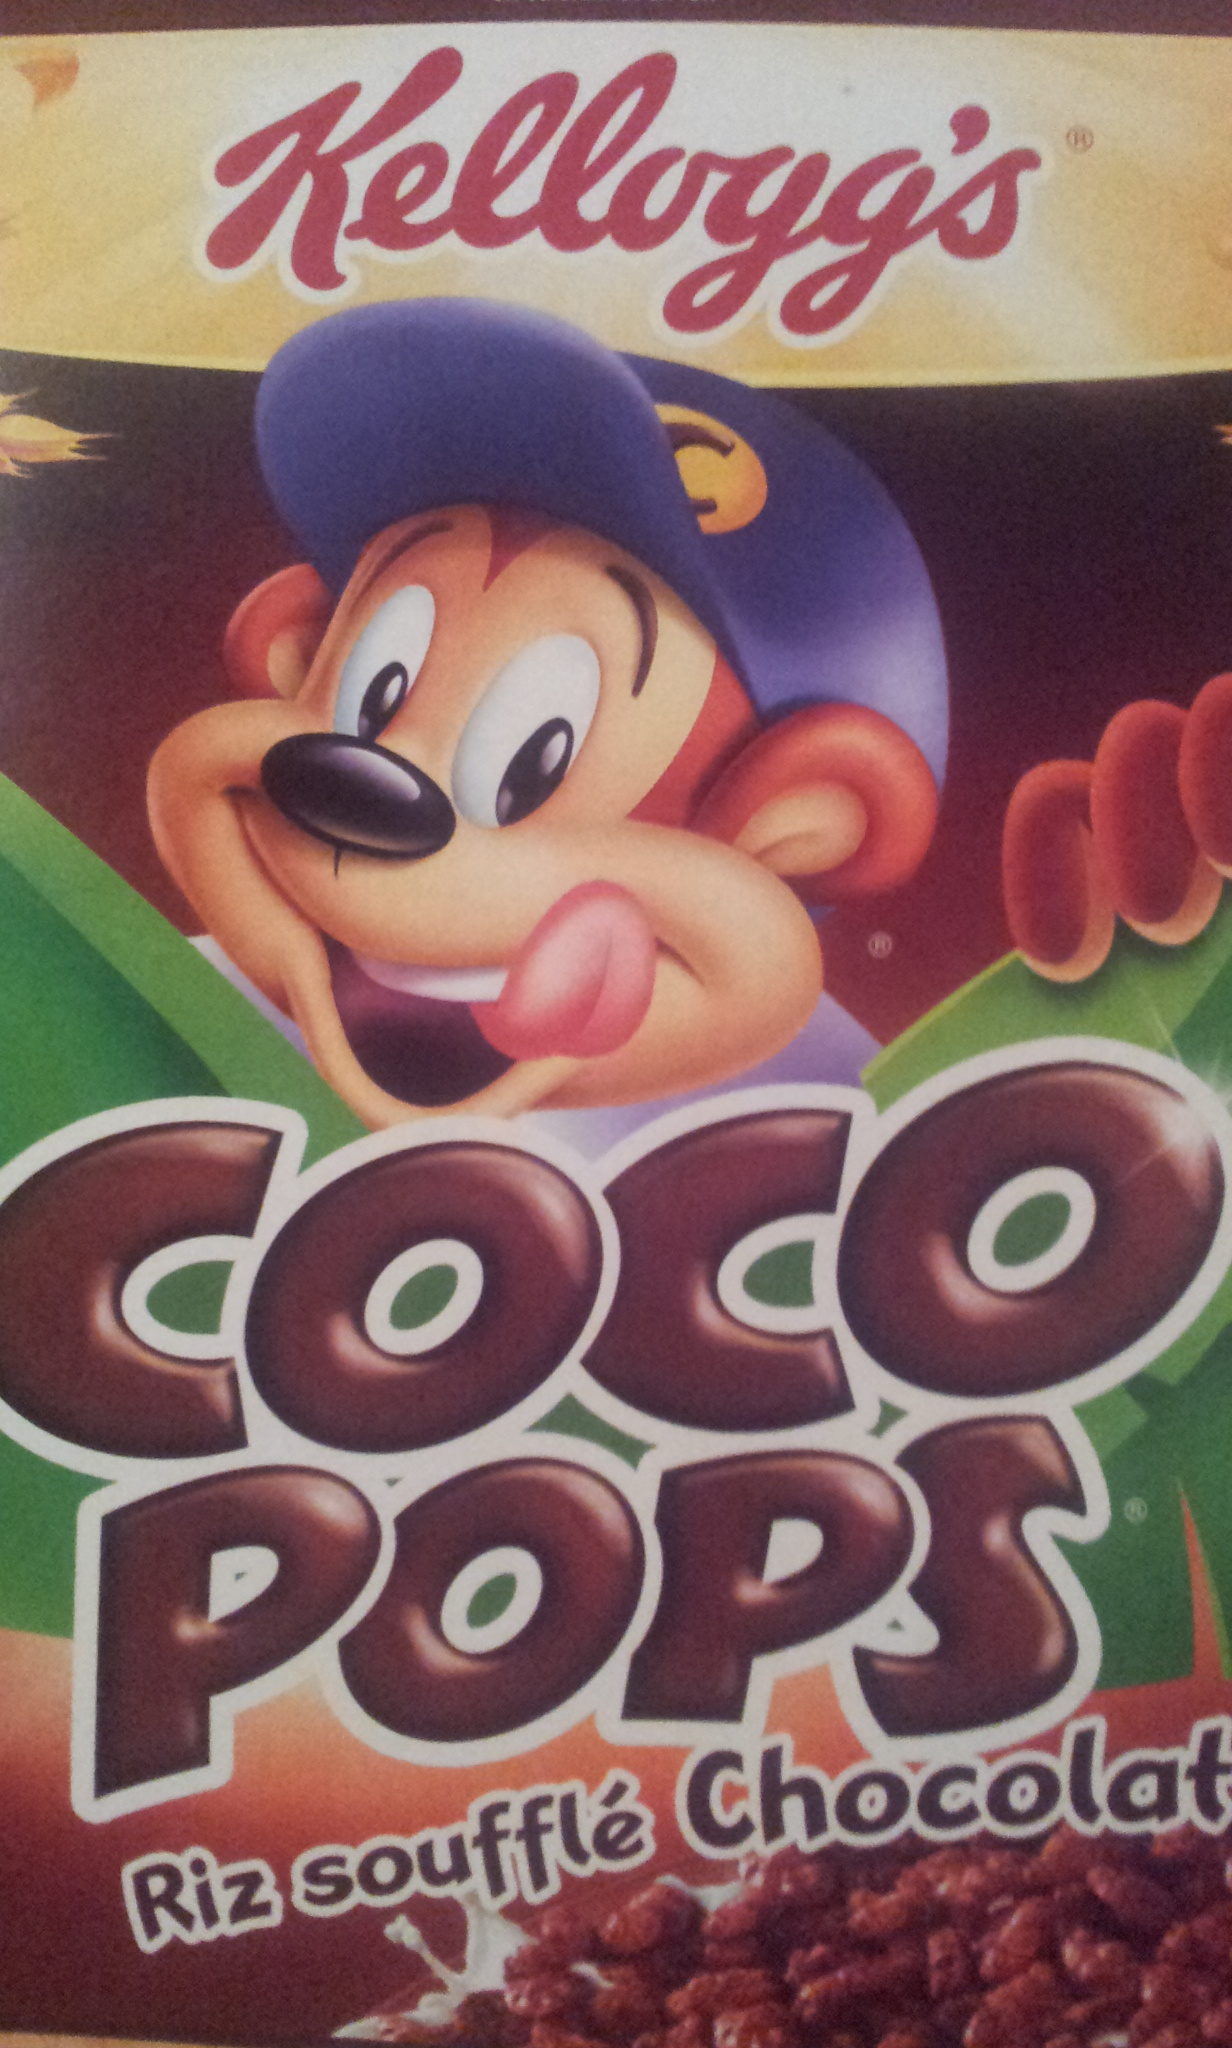 Coco pops - Product - fr